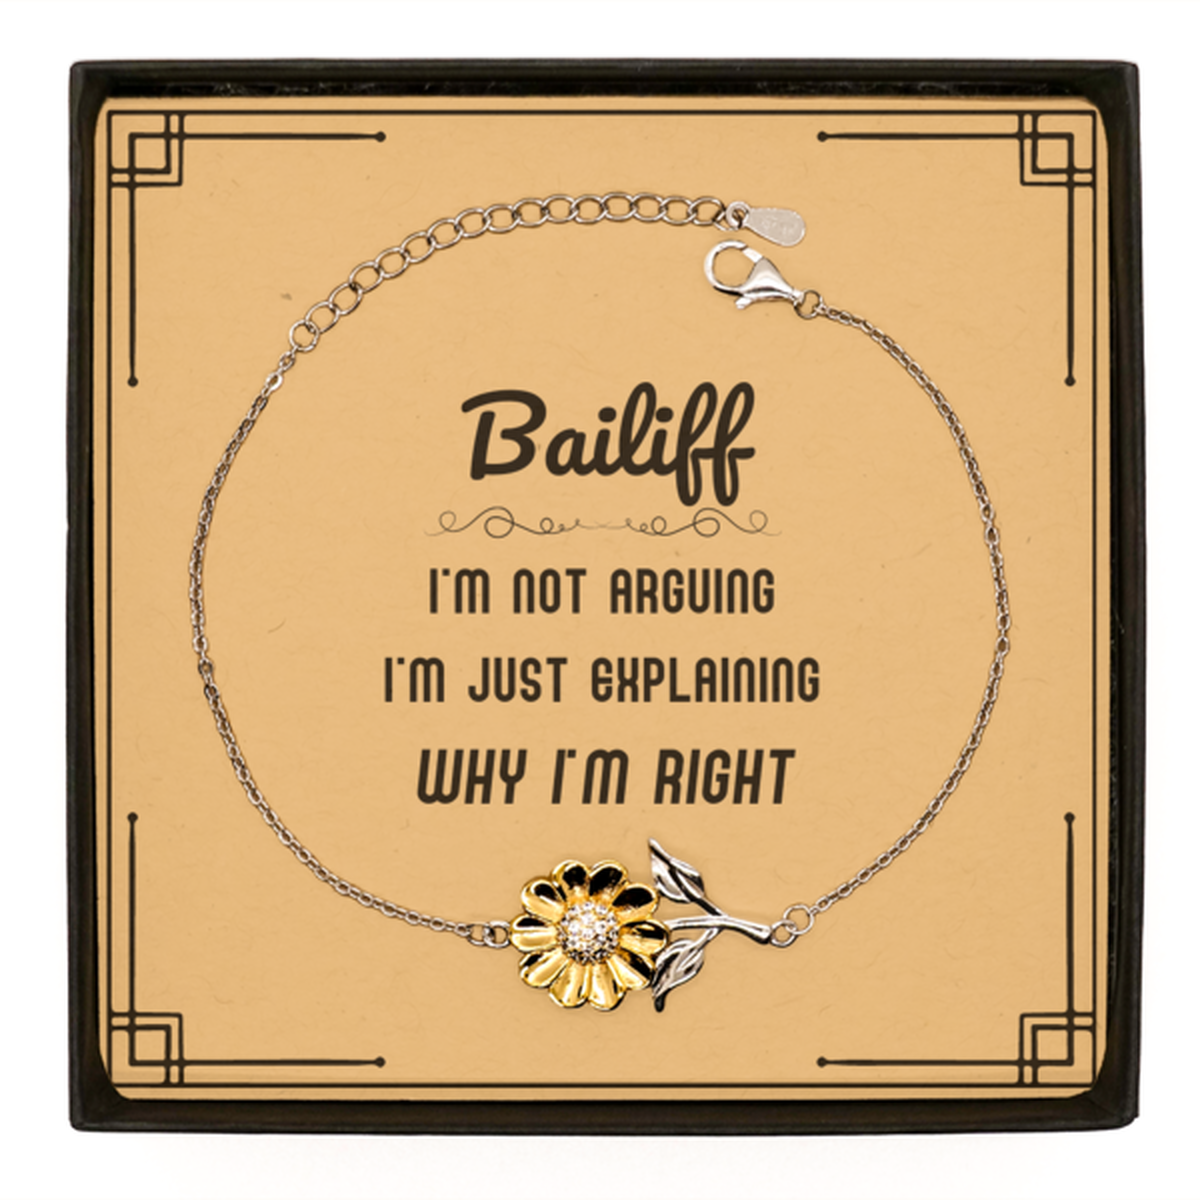 Bailiff I'm not Arguing. I'm Just Explaining Why I'm RIGHT Sunflower Bracelet, Funny Saying Quote Bailiff Gifts For Bailiff Message Card Graduation Birthday Christmas Gifts for Men Women Coworker